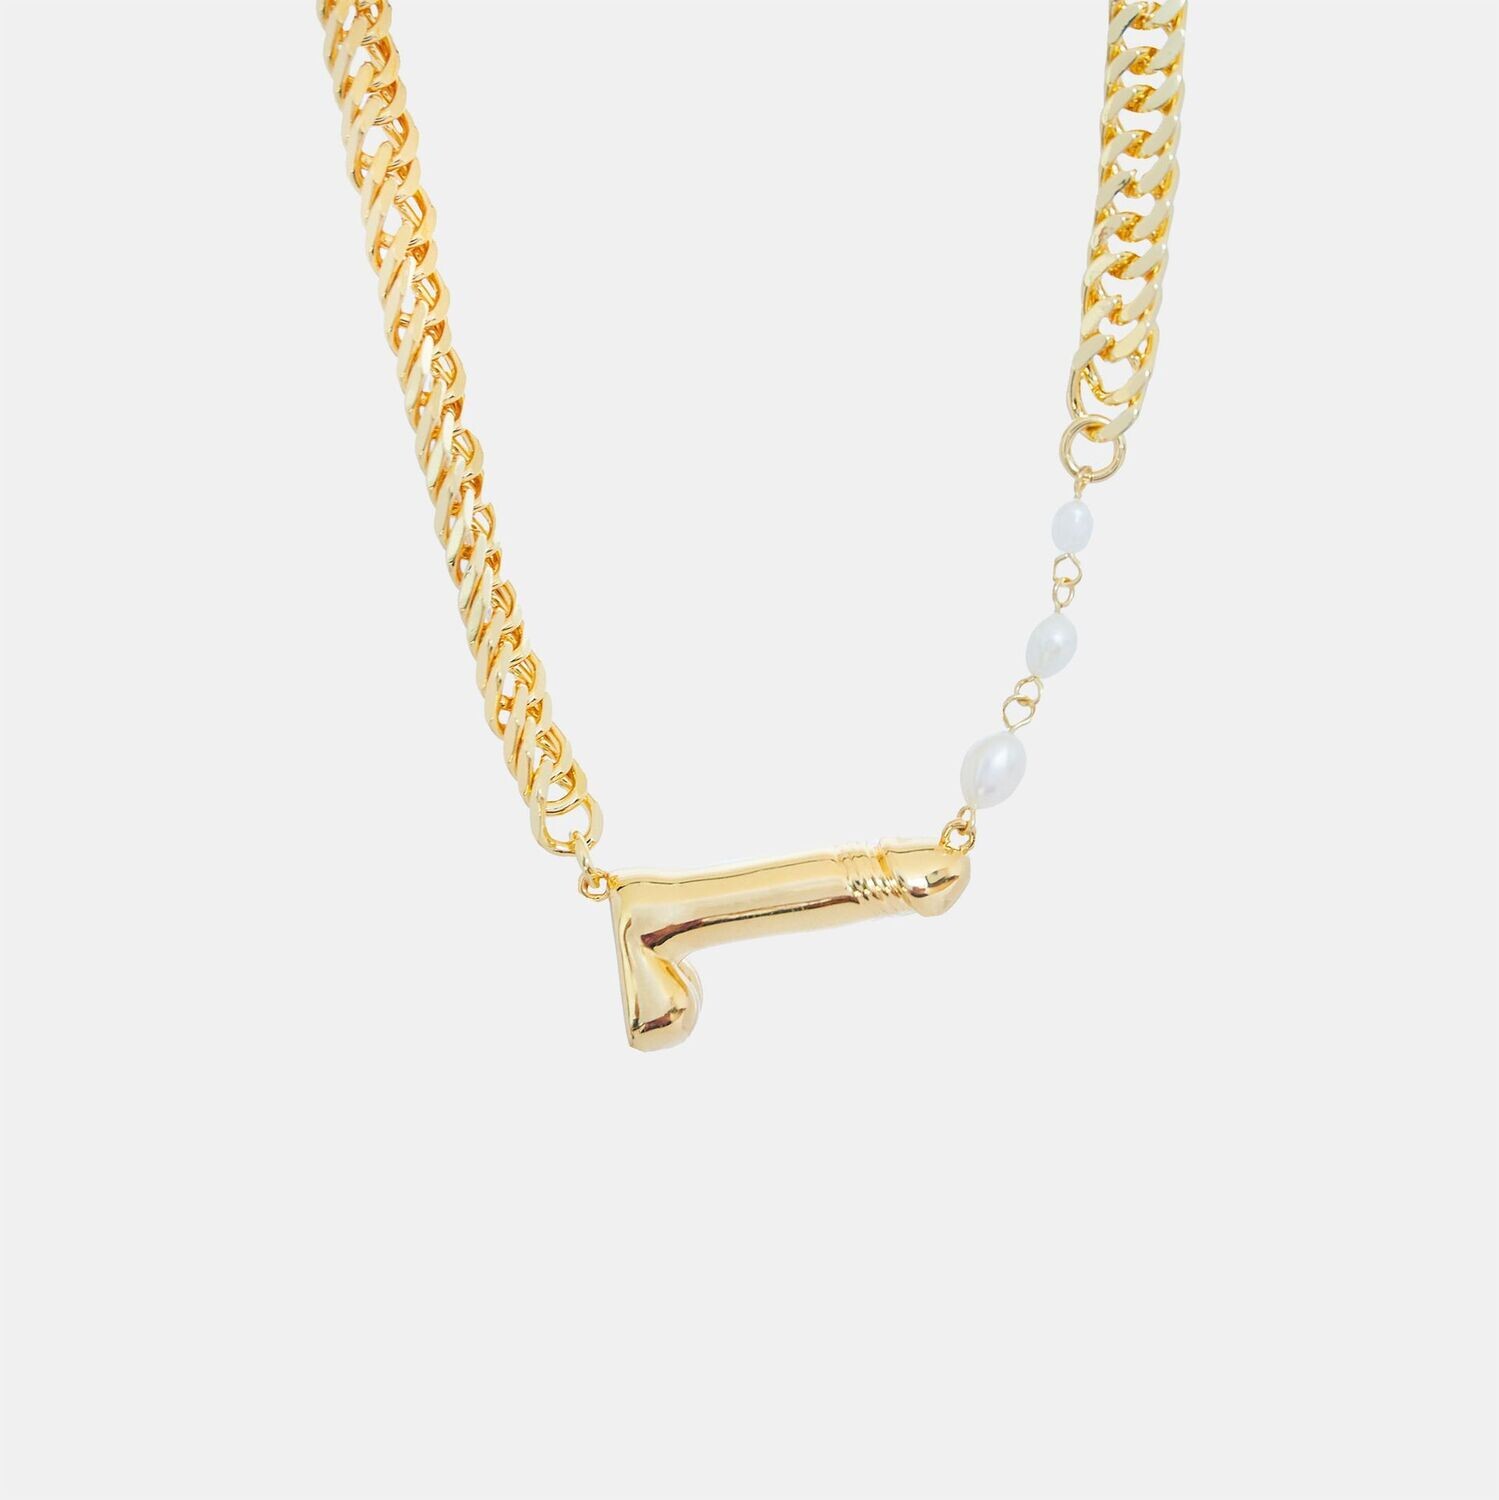 Hoemo World - Pearl Shooter Dick Chunky Pendant Necklace - Gold